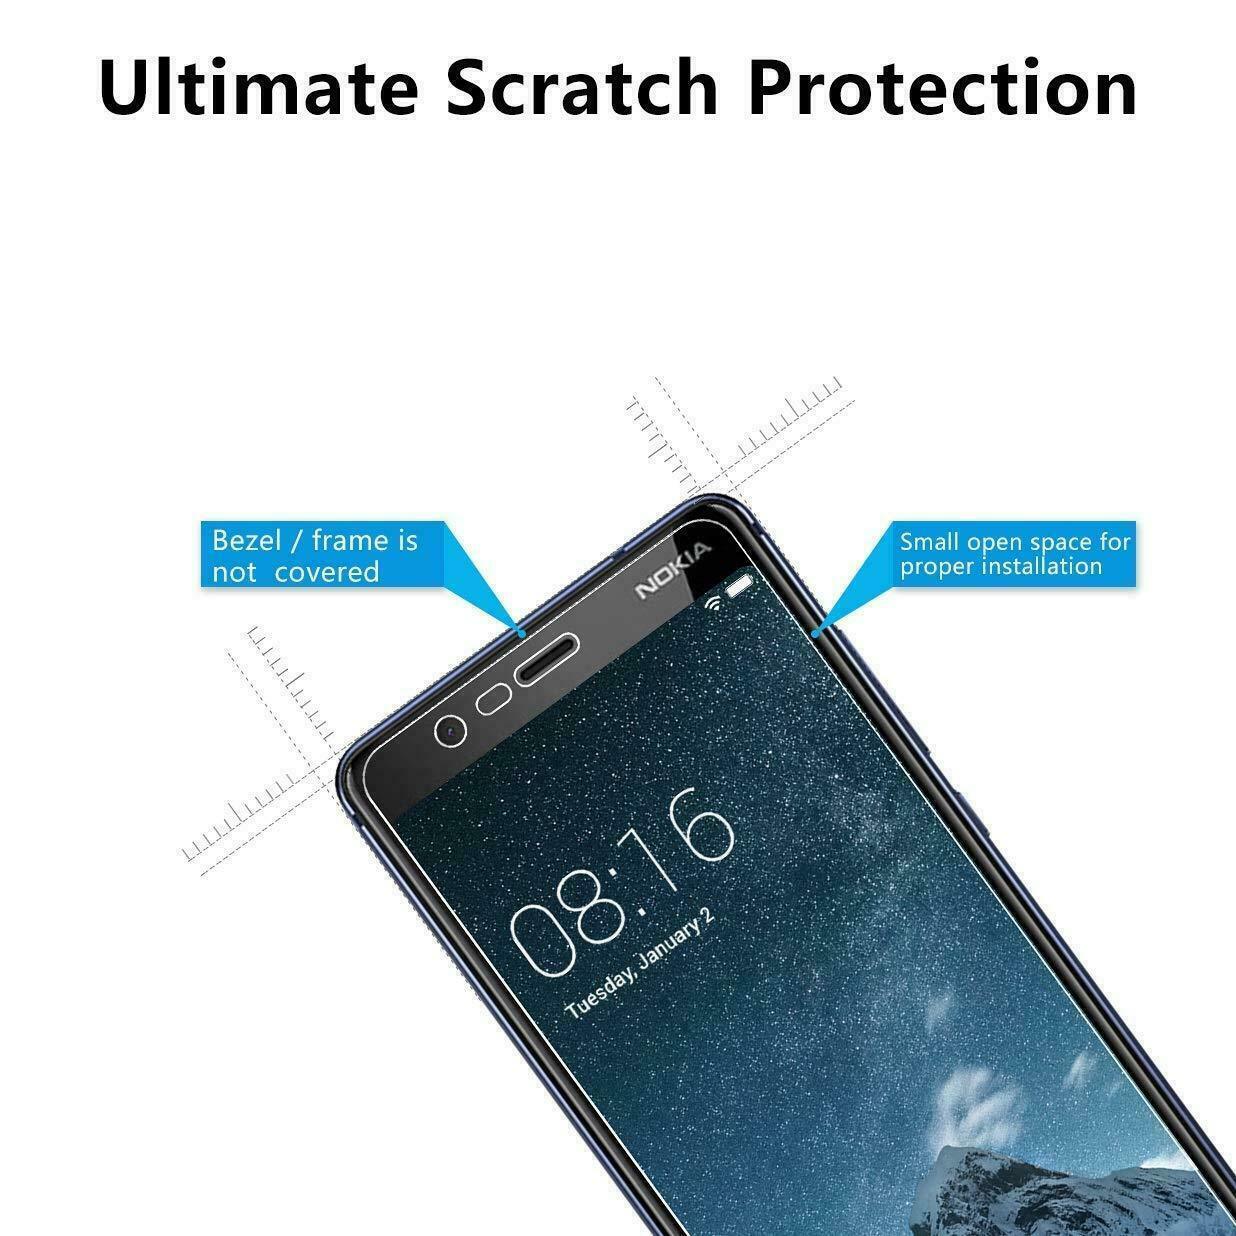 Nokia 5.1 (Nokia 5 2018) Tempered Glass for [product_price] - First Help Tech